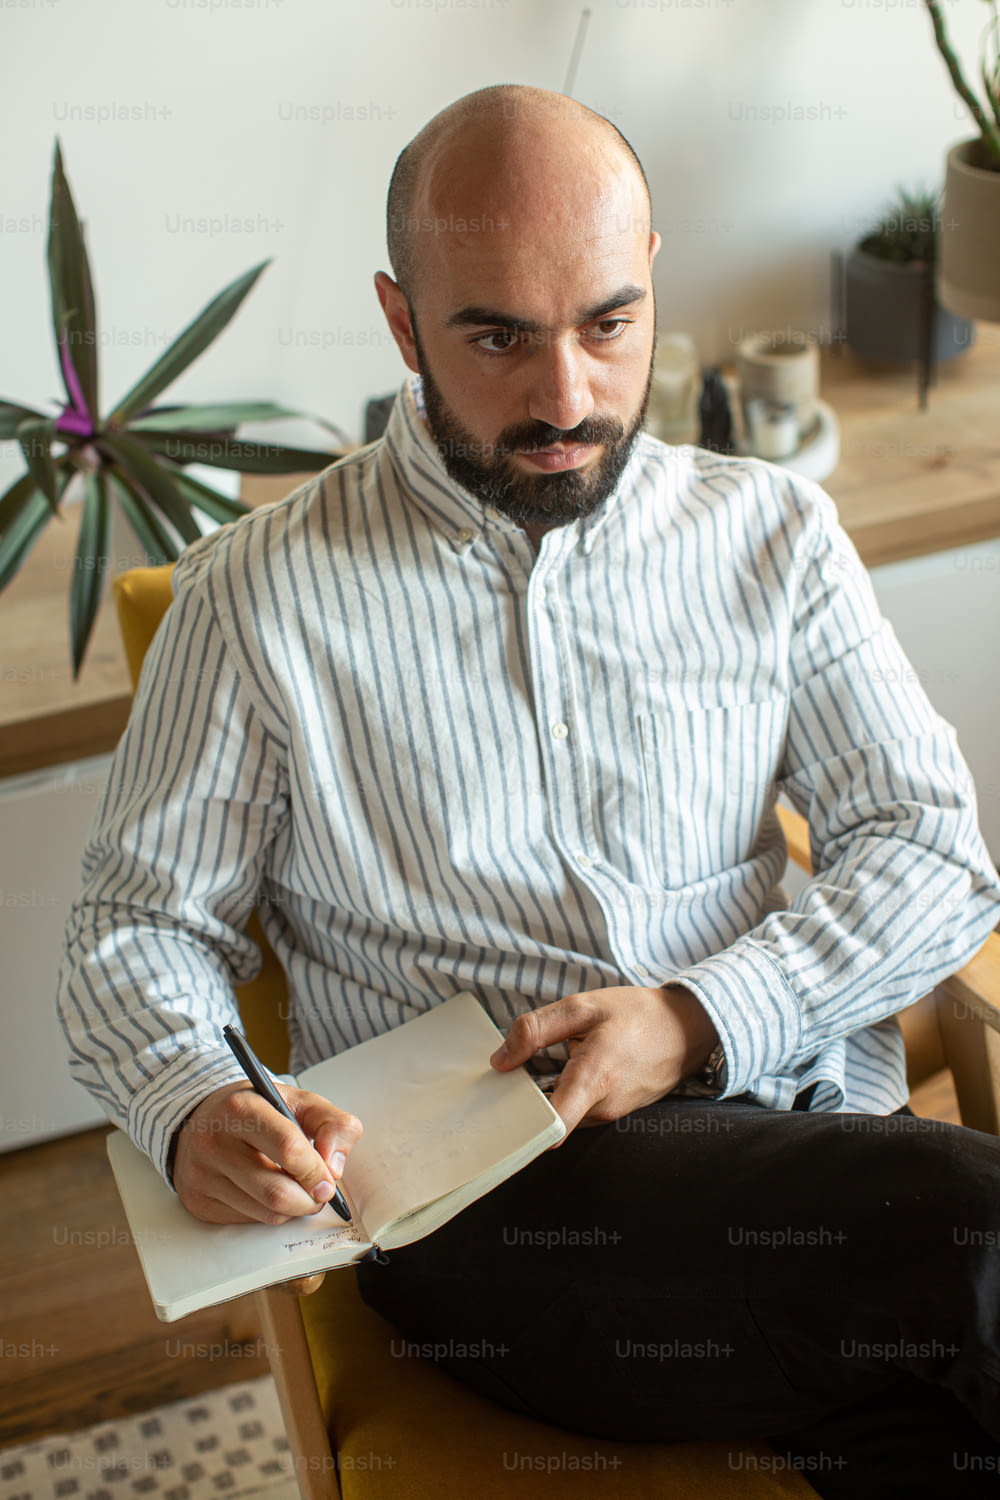 a man sitting on a chair writing on a piece of paper